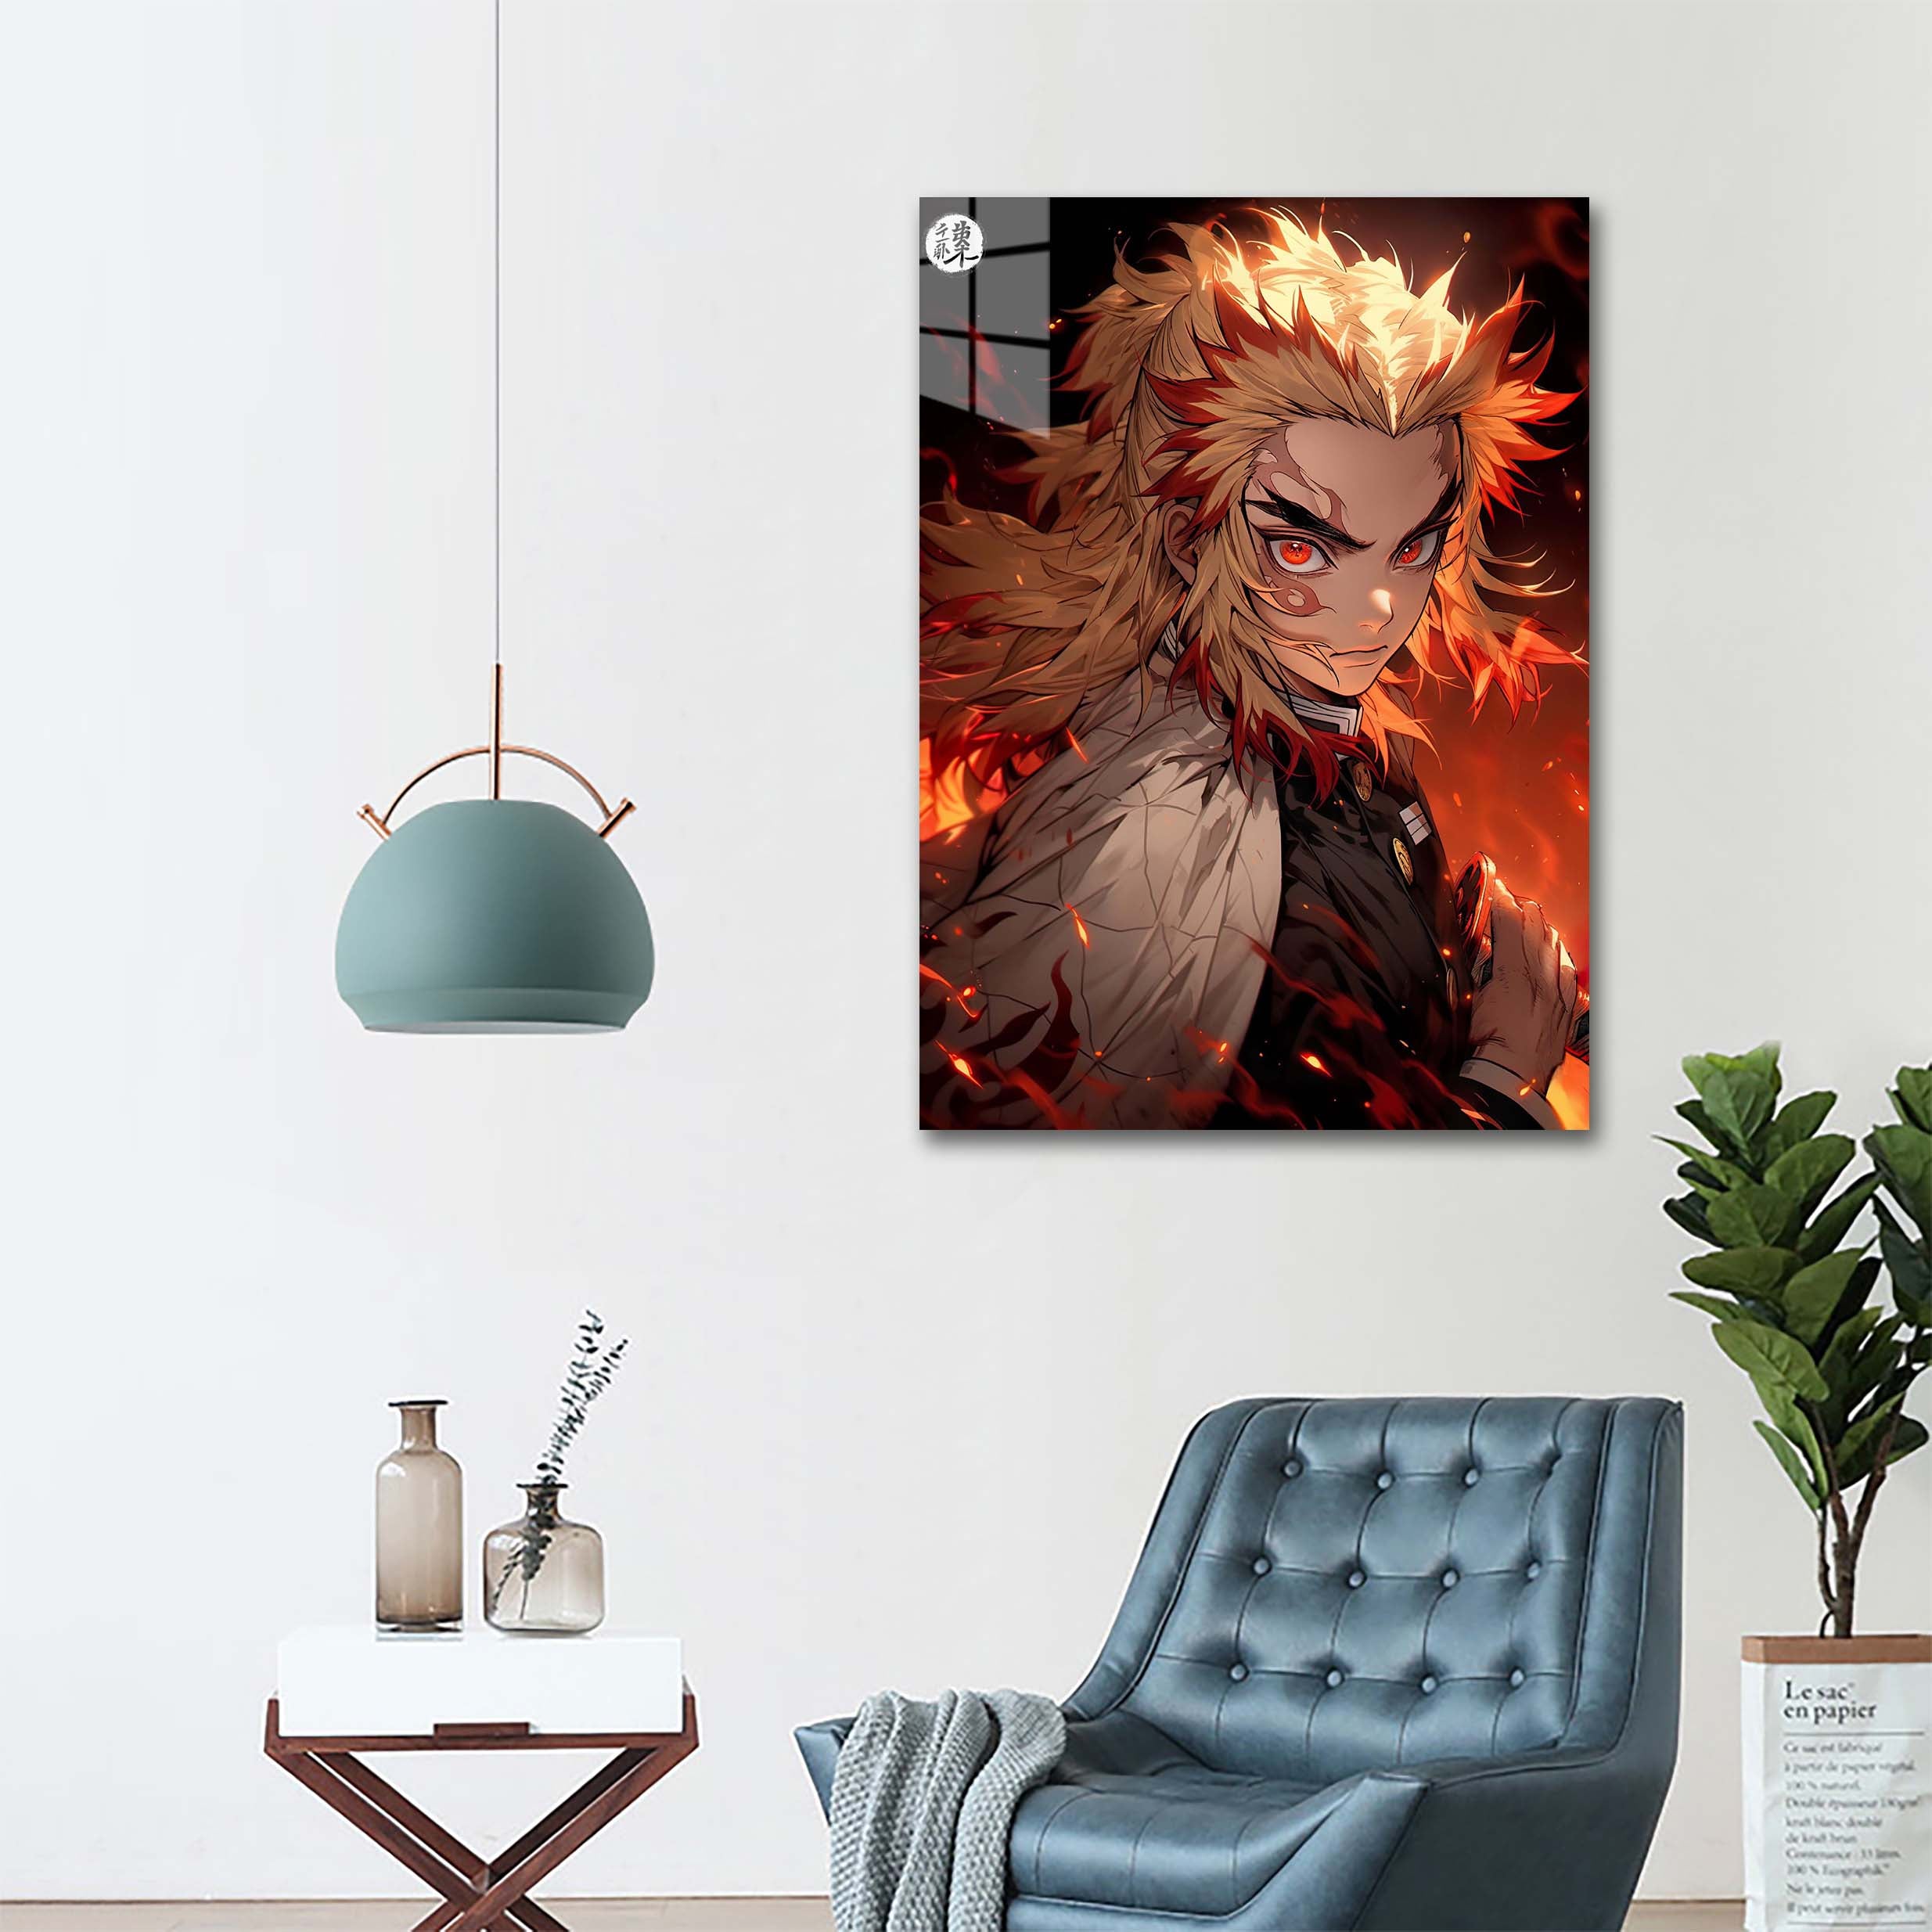 Rengoku fire-designed by @An other Mid journey